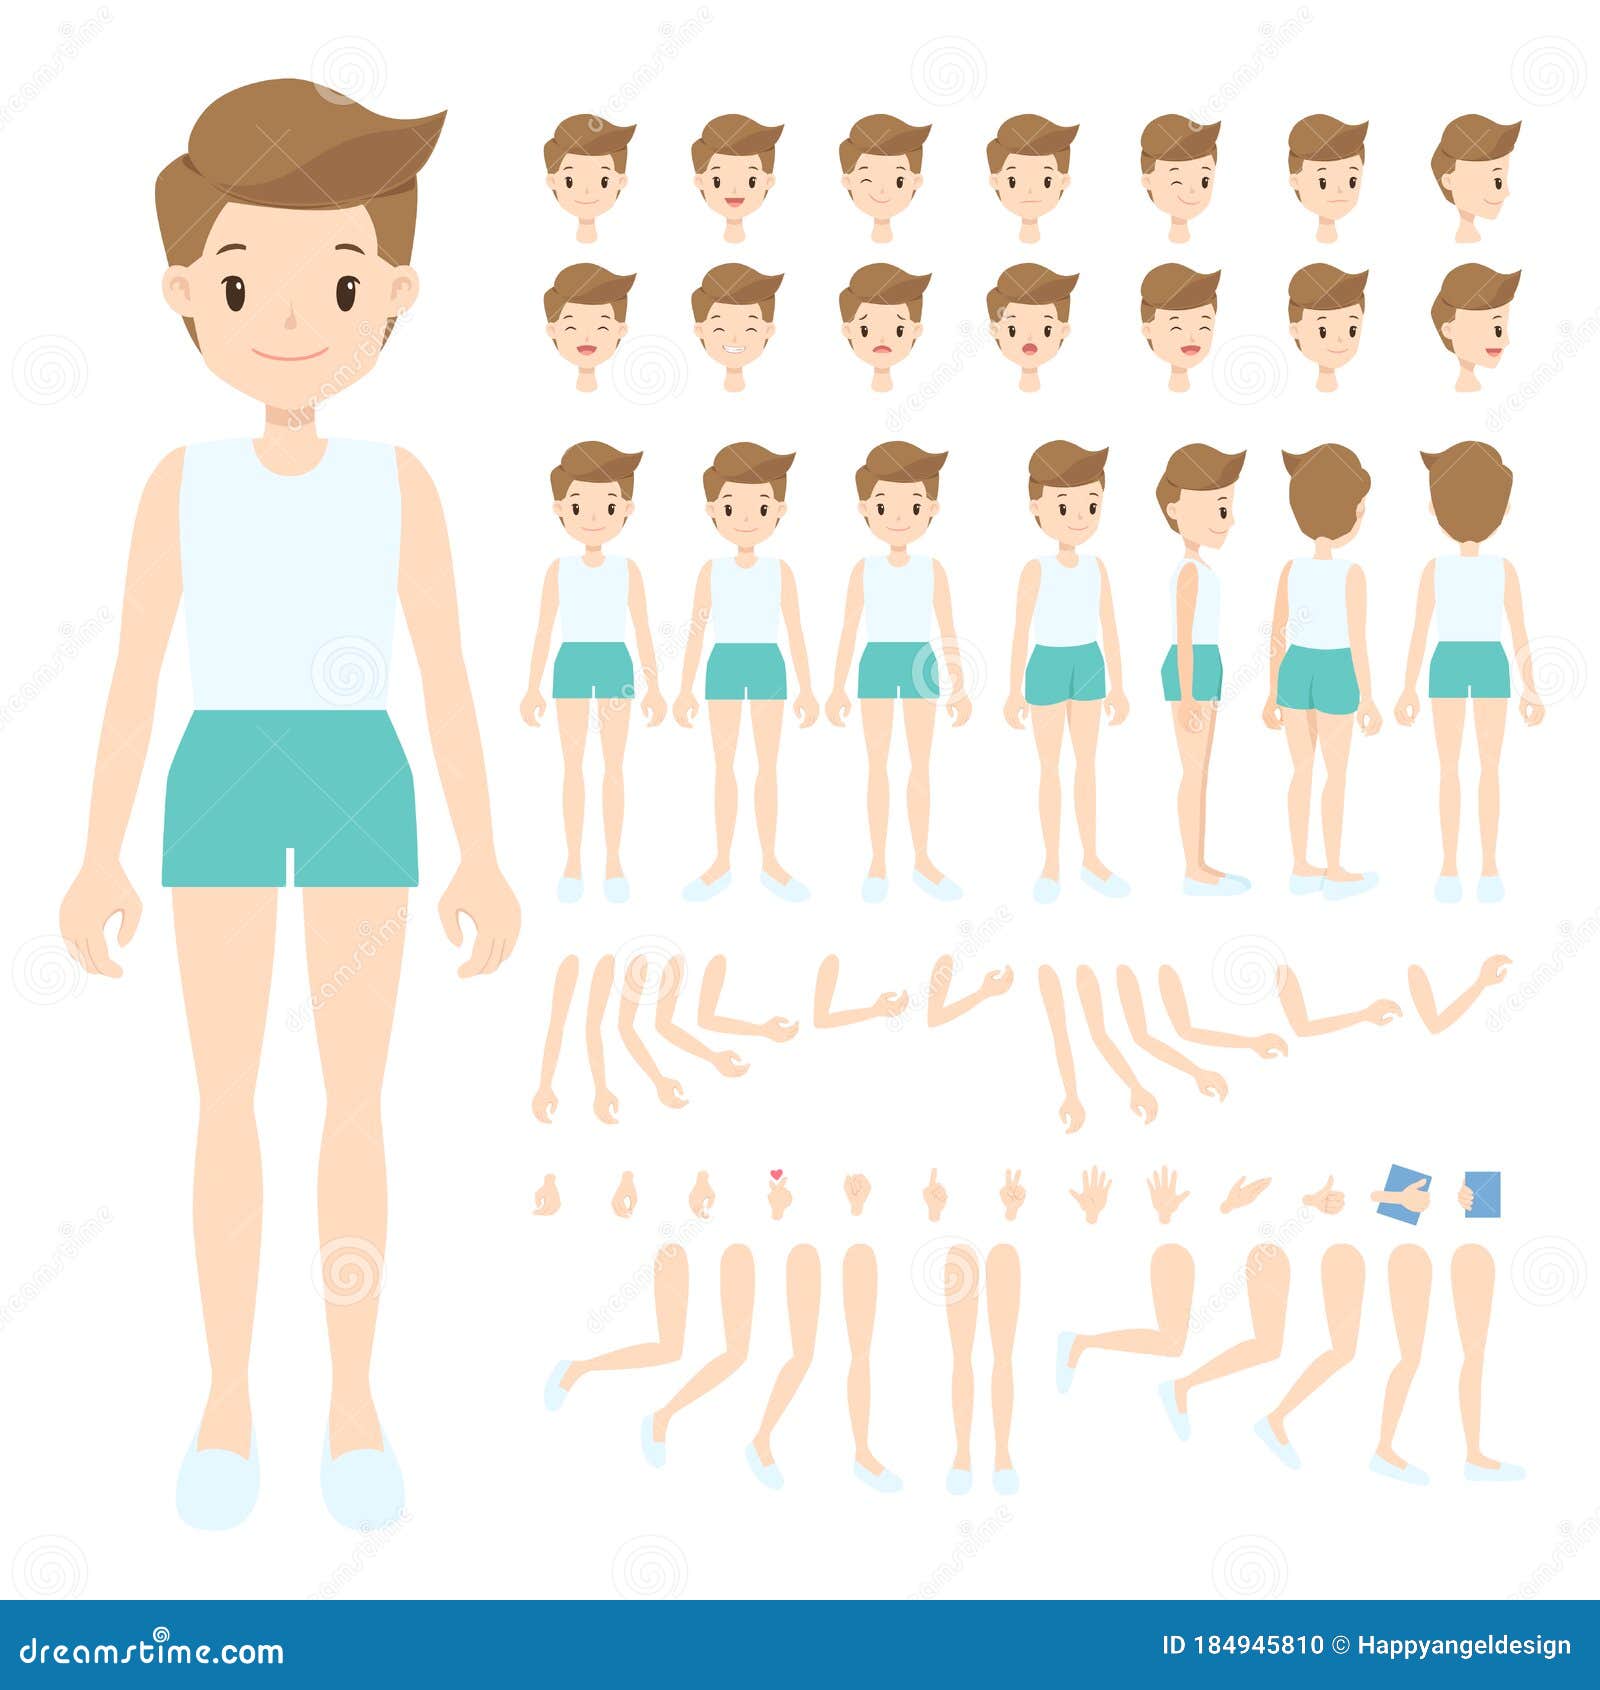 Flat Cartoon Boy with Parts of Body, Face Expression, Arm, Leg, and ...